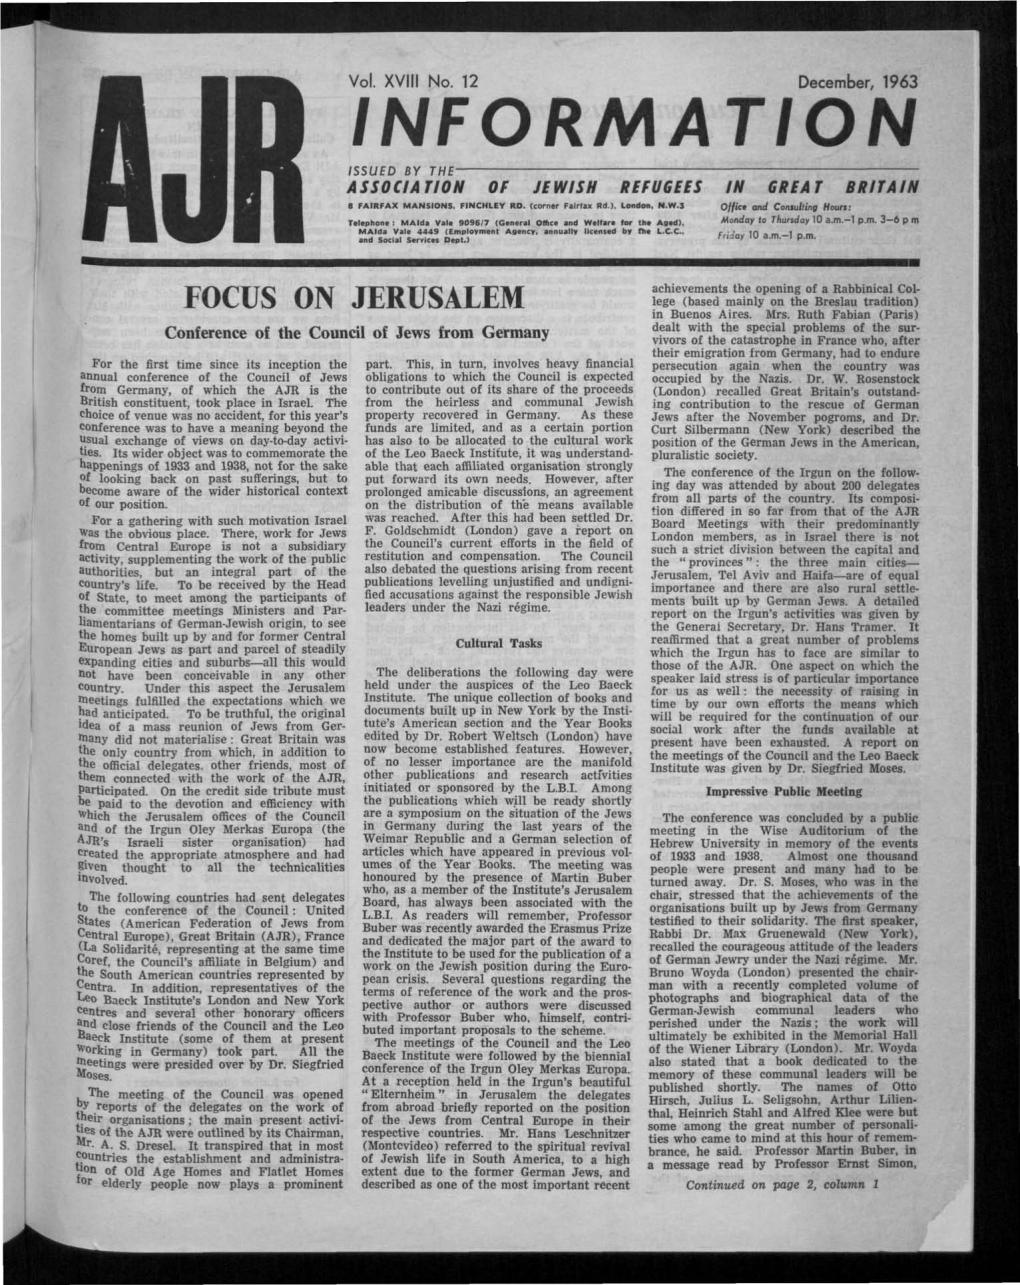 INFORMATION ISSUED by the ASSOCI AT/ON of JEWISH REFUGEES in GREAT BRITAIN 8 FAIRFAX MANSIONS, FINCHLEY RD, (Corner Fairfax Rd), London